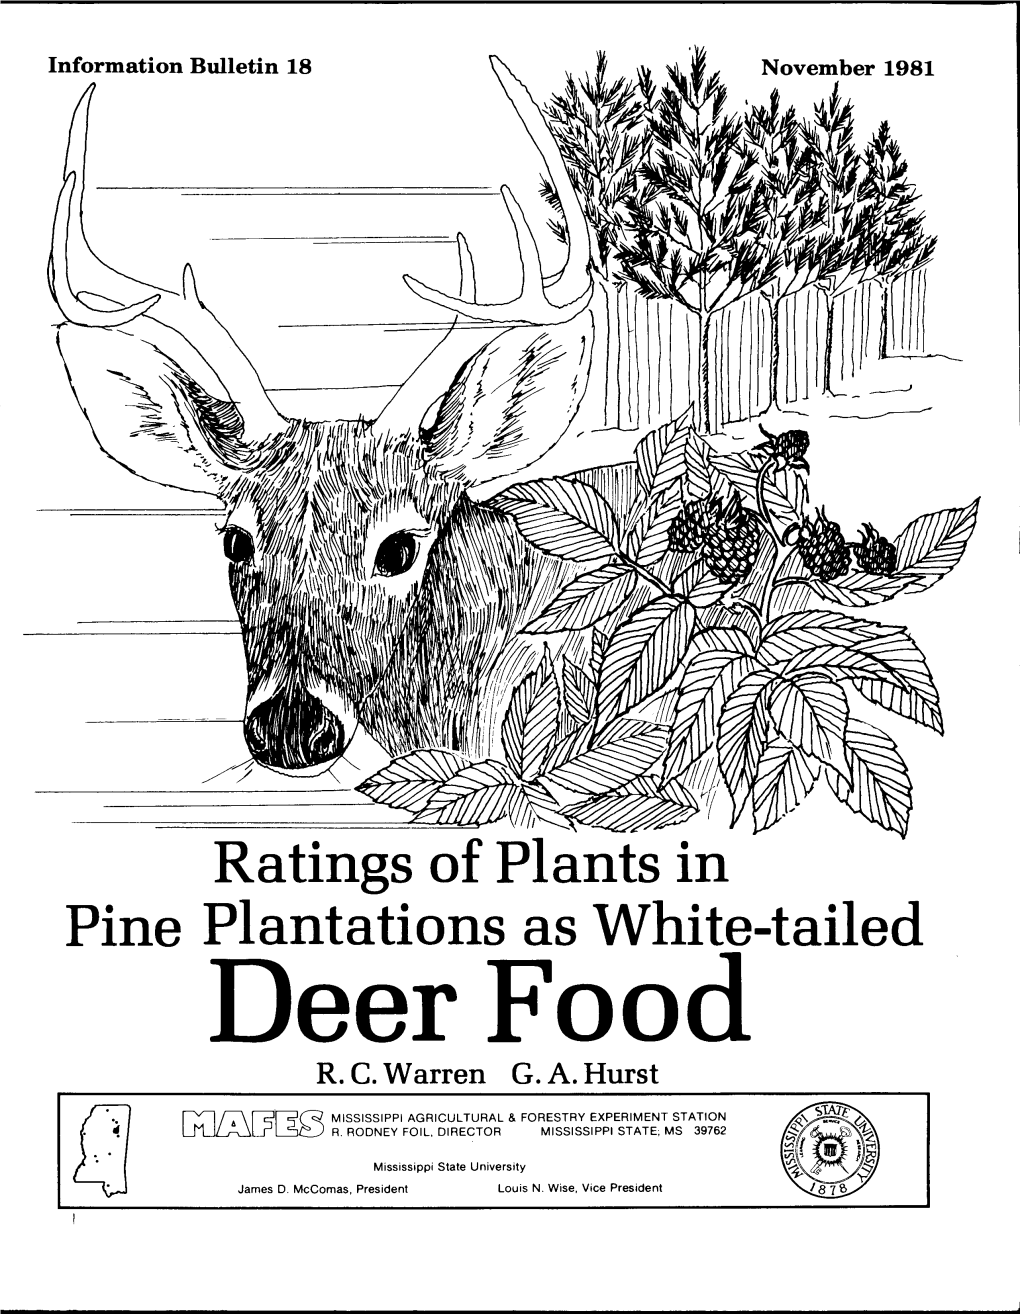 Ratings of Plants in Pine Plantations As White-Tailed Deer Food R